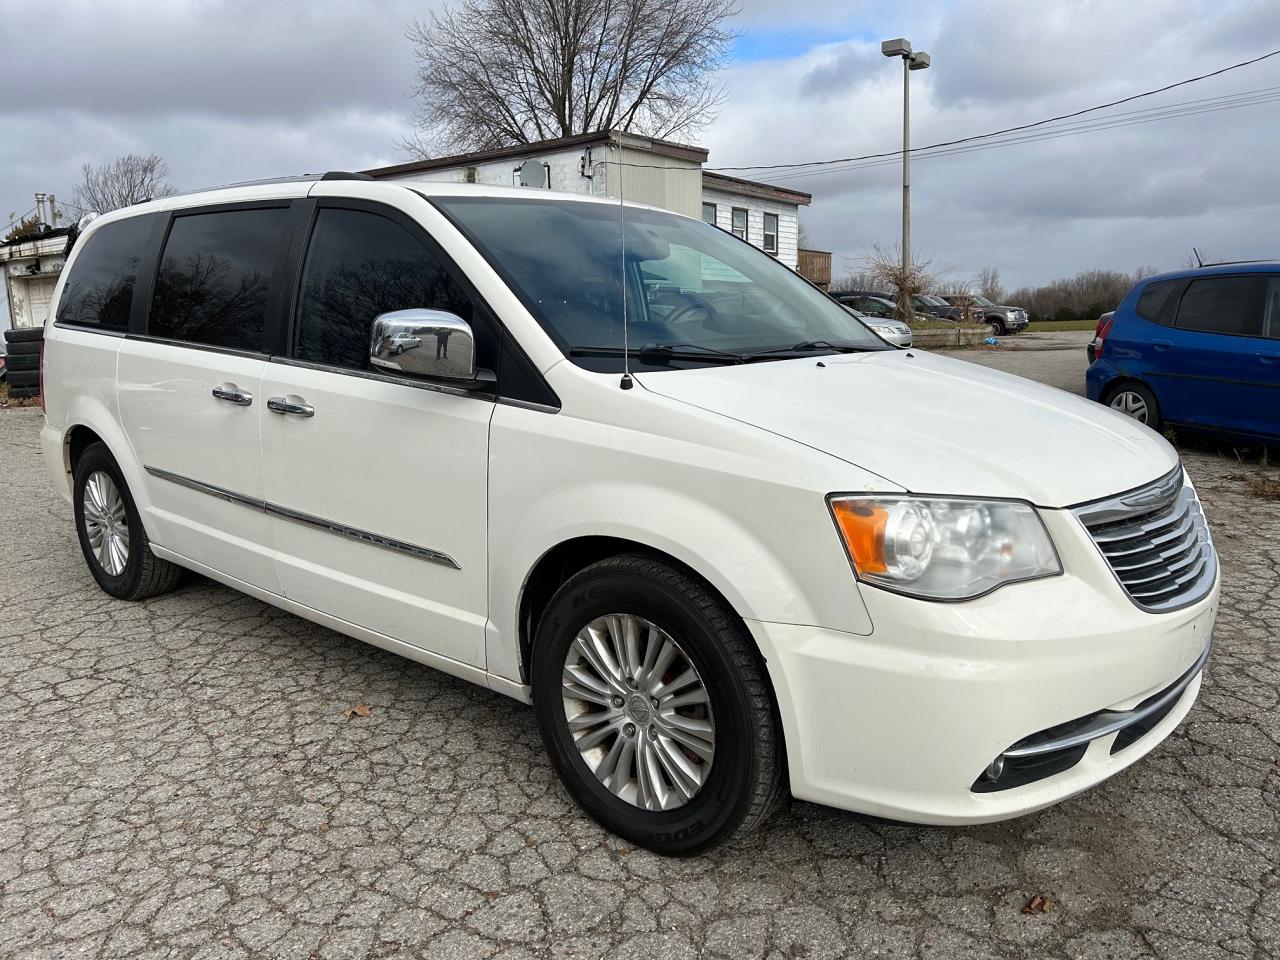 2012 Chrysler Town & Country Ltd*Runs&Drive Great*7 Pass*226 Kms*No Accidents* - Photo #3